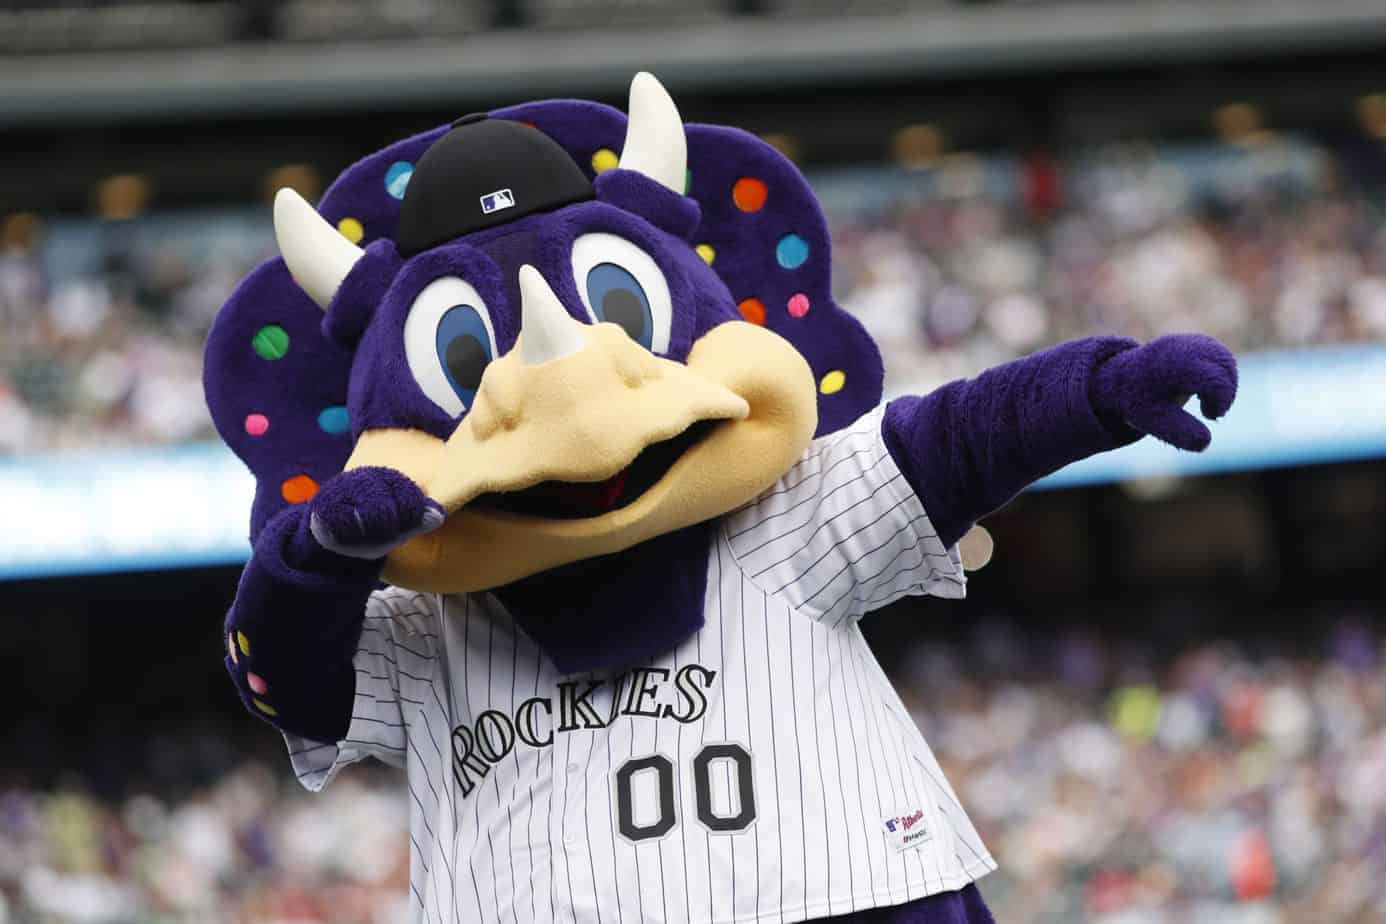 The Colorado Rockies concluded their investigation about a fan who was accused of yelling a racial slur but actually was just calling for the mascot, Dinger